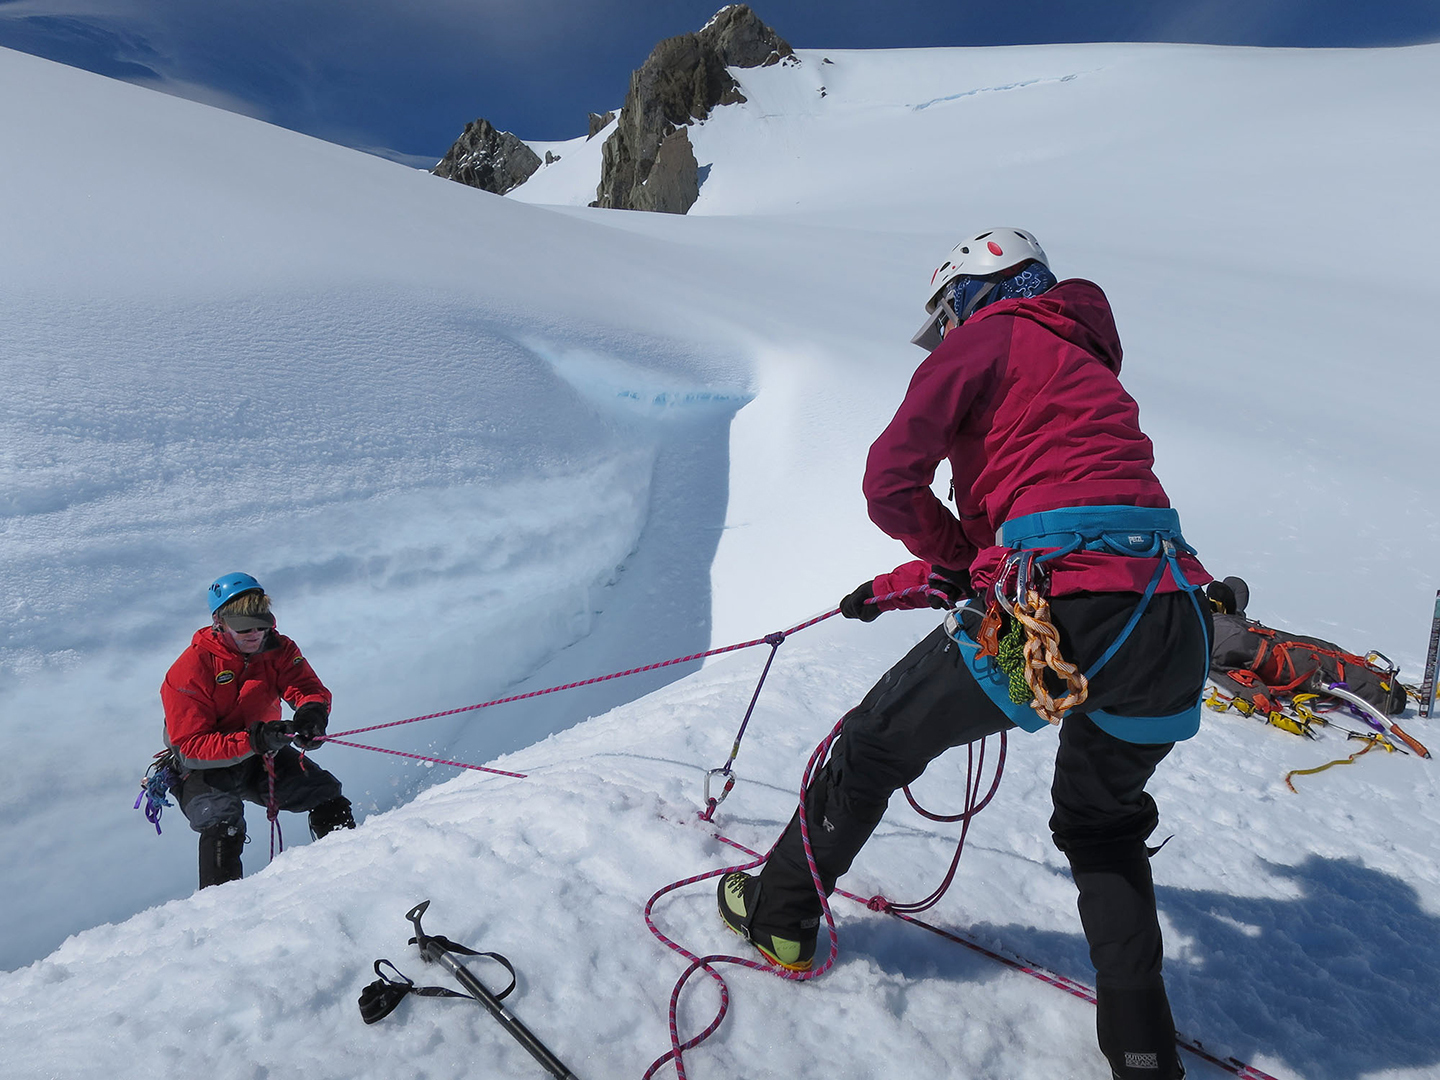 Training for the unexpected - learning crevasse rescue techniques